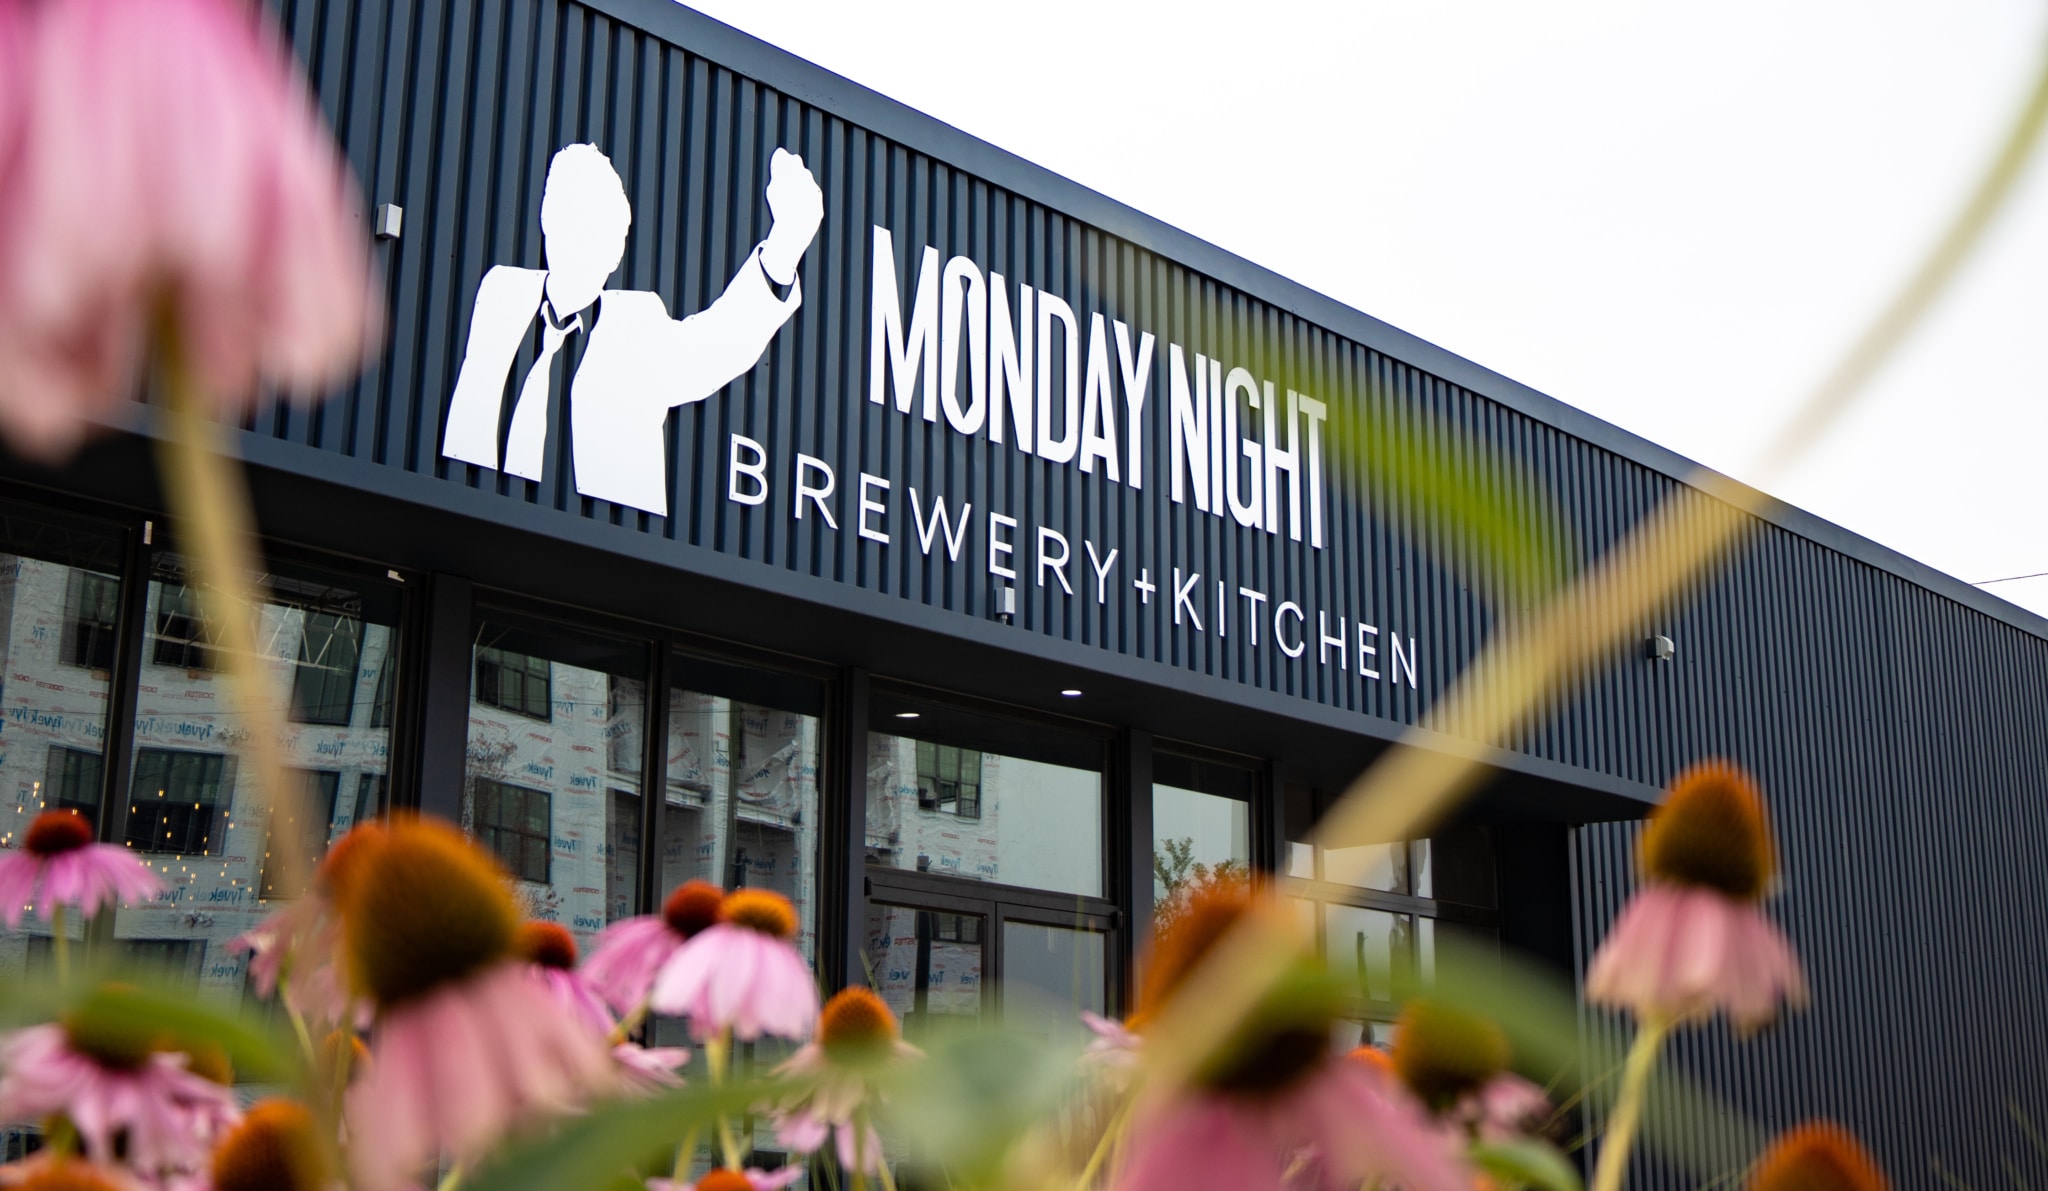 Monday Night Brewing 2 scaled NOW OPEN: Monday Night Brewing is ready to welcome you in Parkside